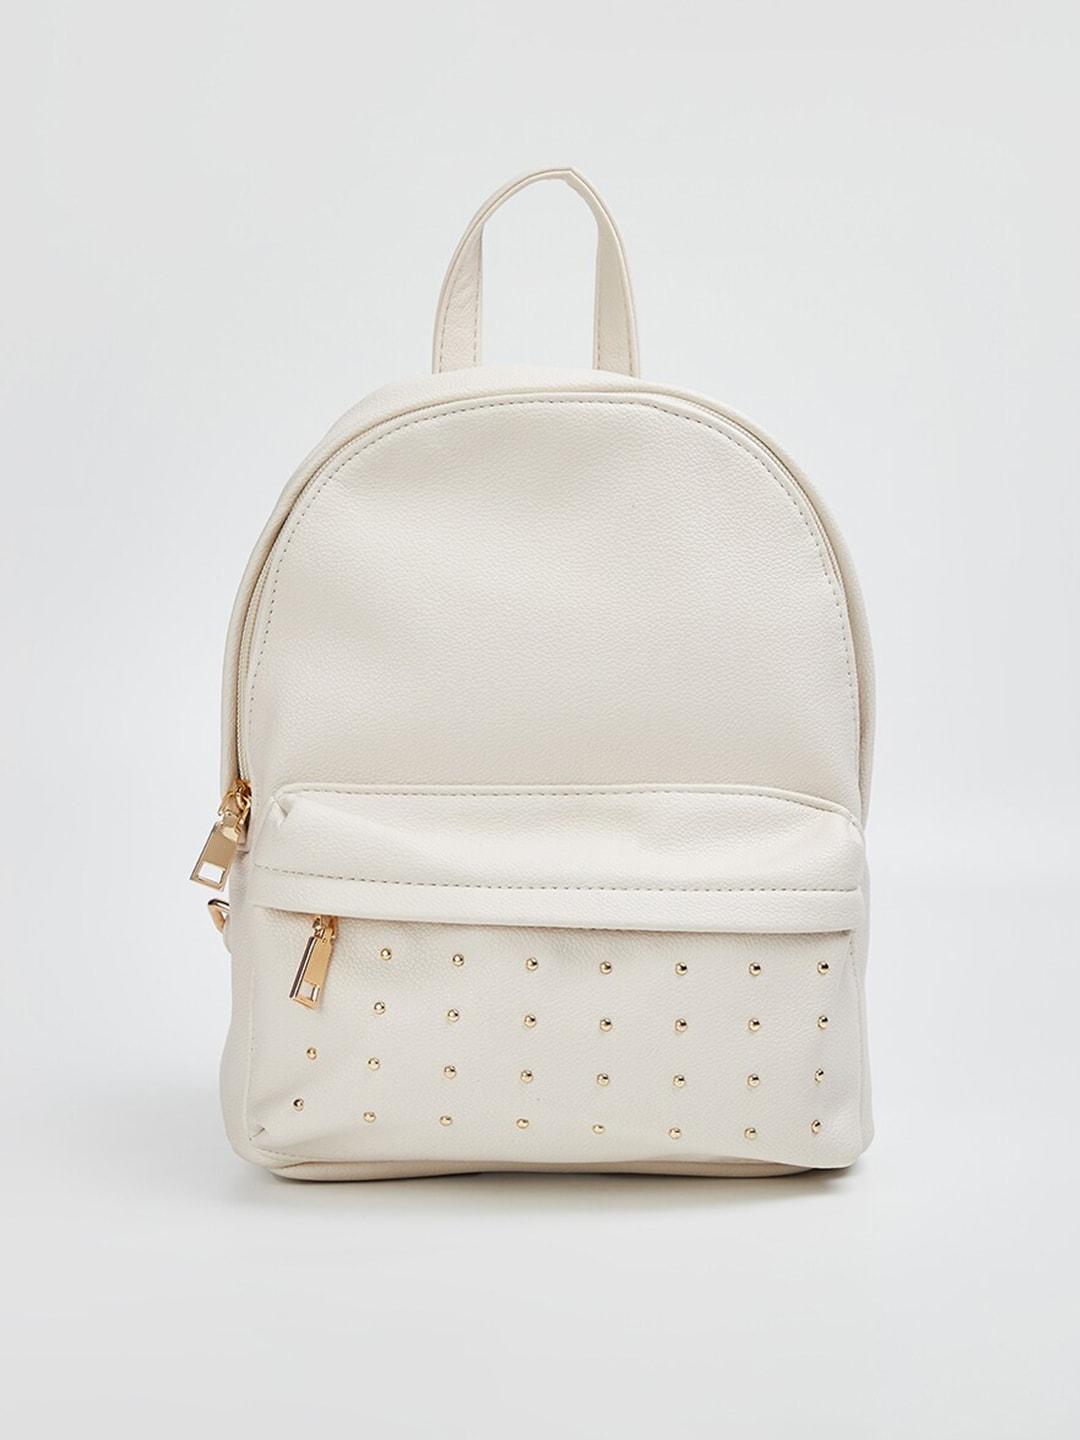 max women embellished small backpack